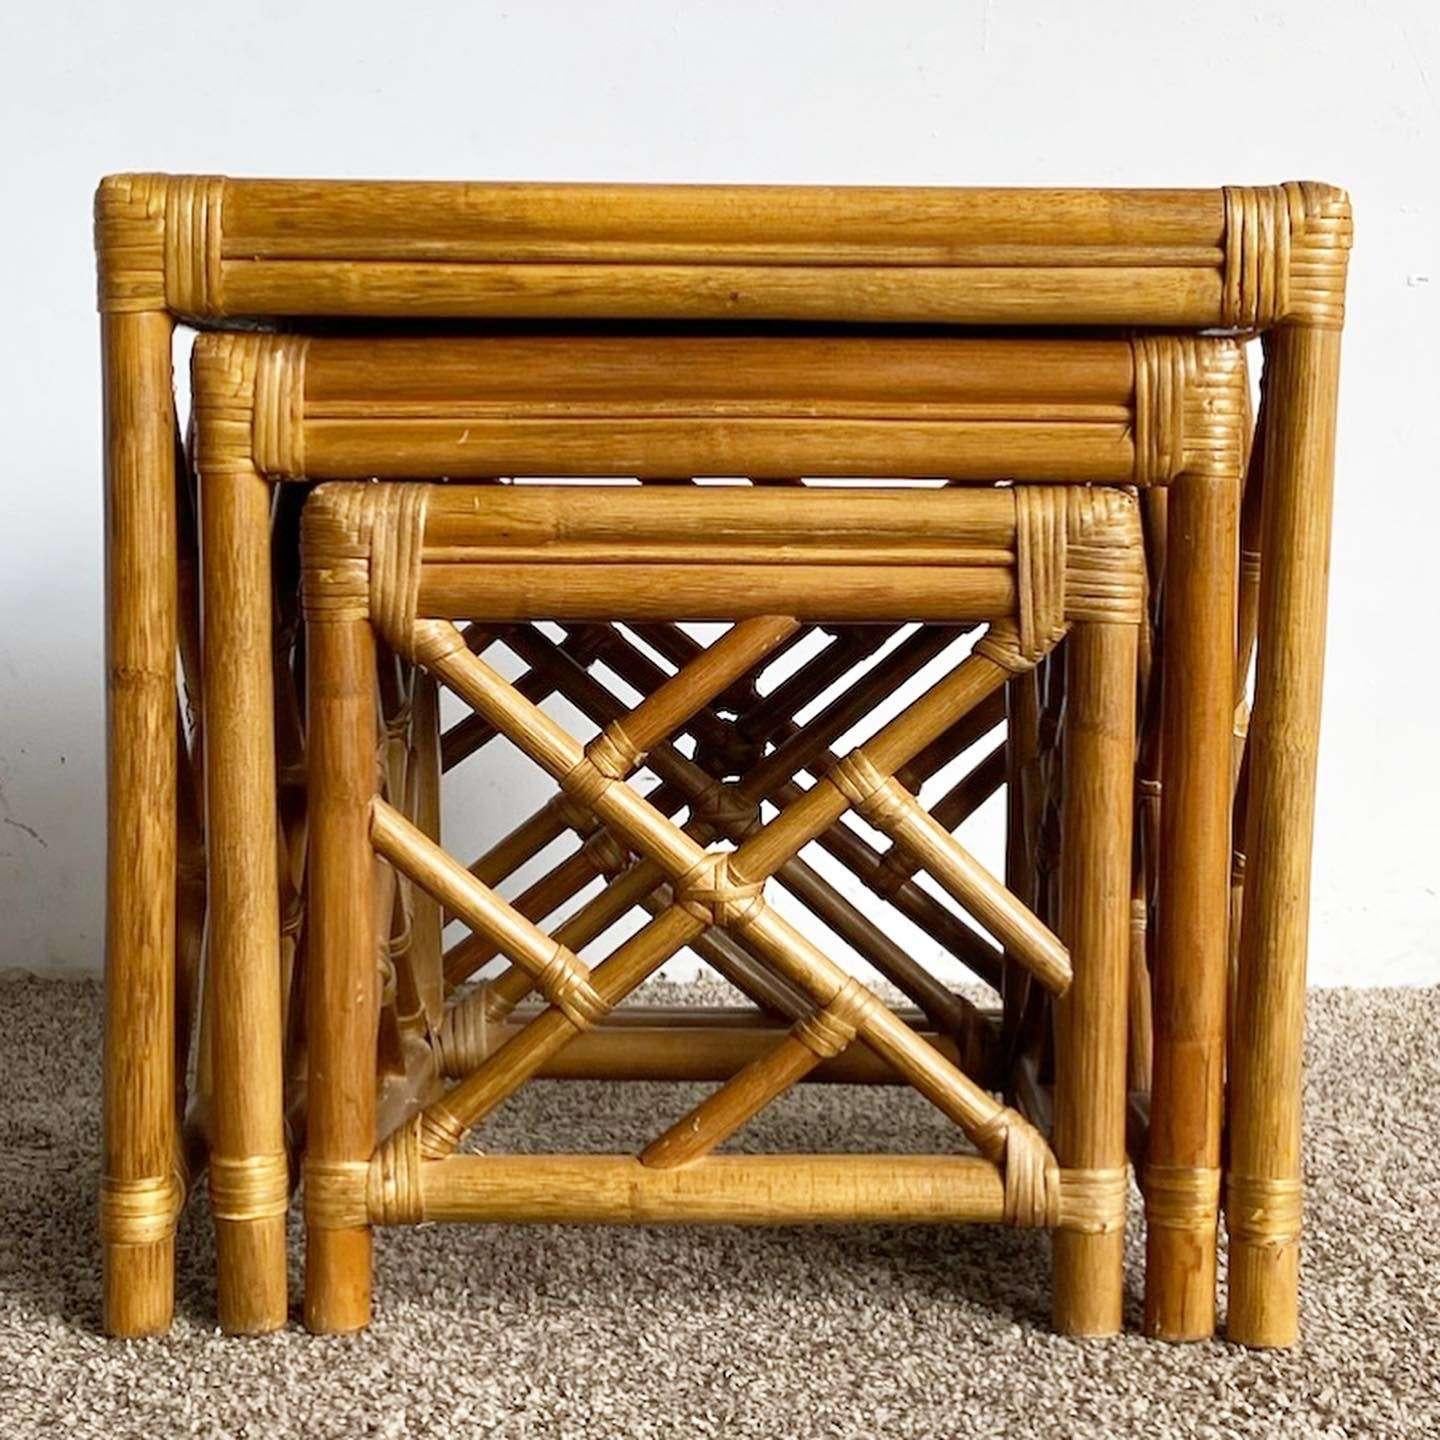 Amazing vintage boho chic Chippendale style nesting tables. Each feature a bamboo construction with rattan jointing and wicker tops.

Medium table measures 19”W, 14.5”D, 18.5”H
Small table measures 15.25”W, 12.75”D, 16”H